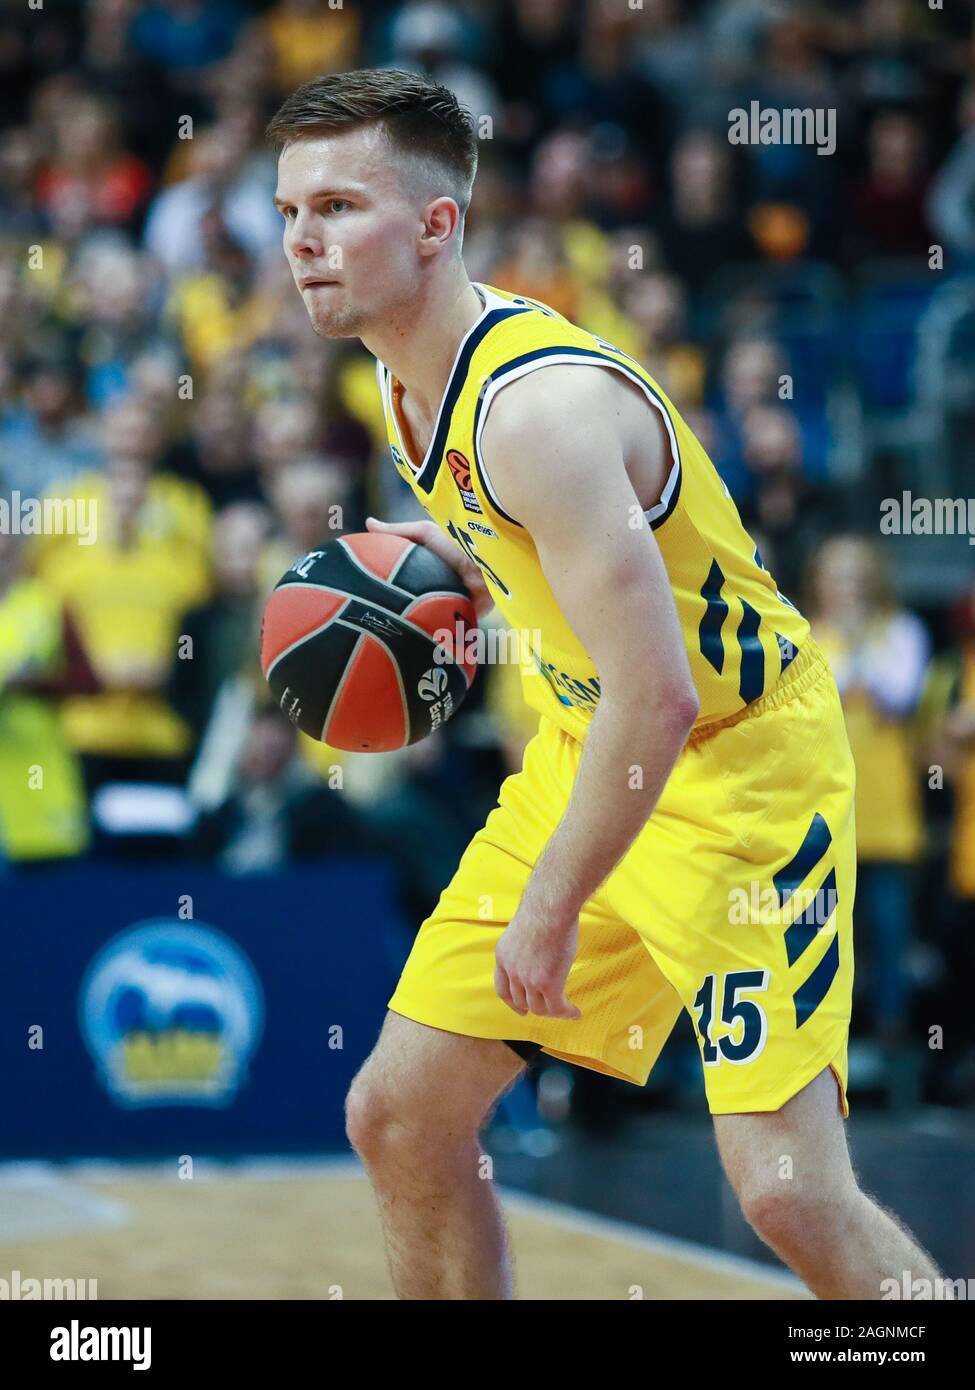 Berlin, Germany, December 18, 2019:Martin Hermannsson of Alba Berlin in action during the EuroLeague basketball match Stock Photo